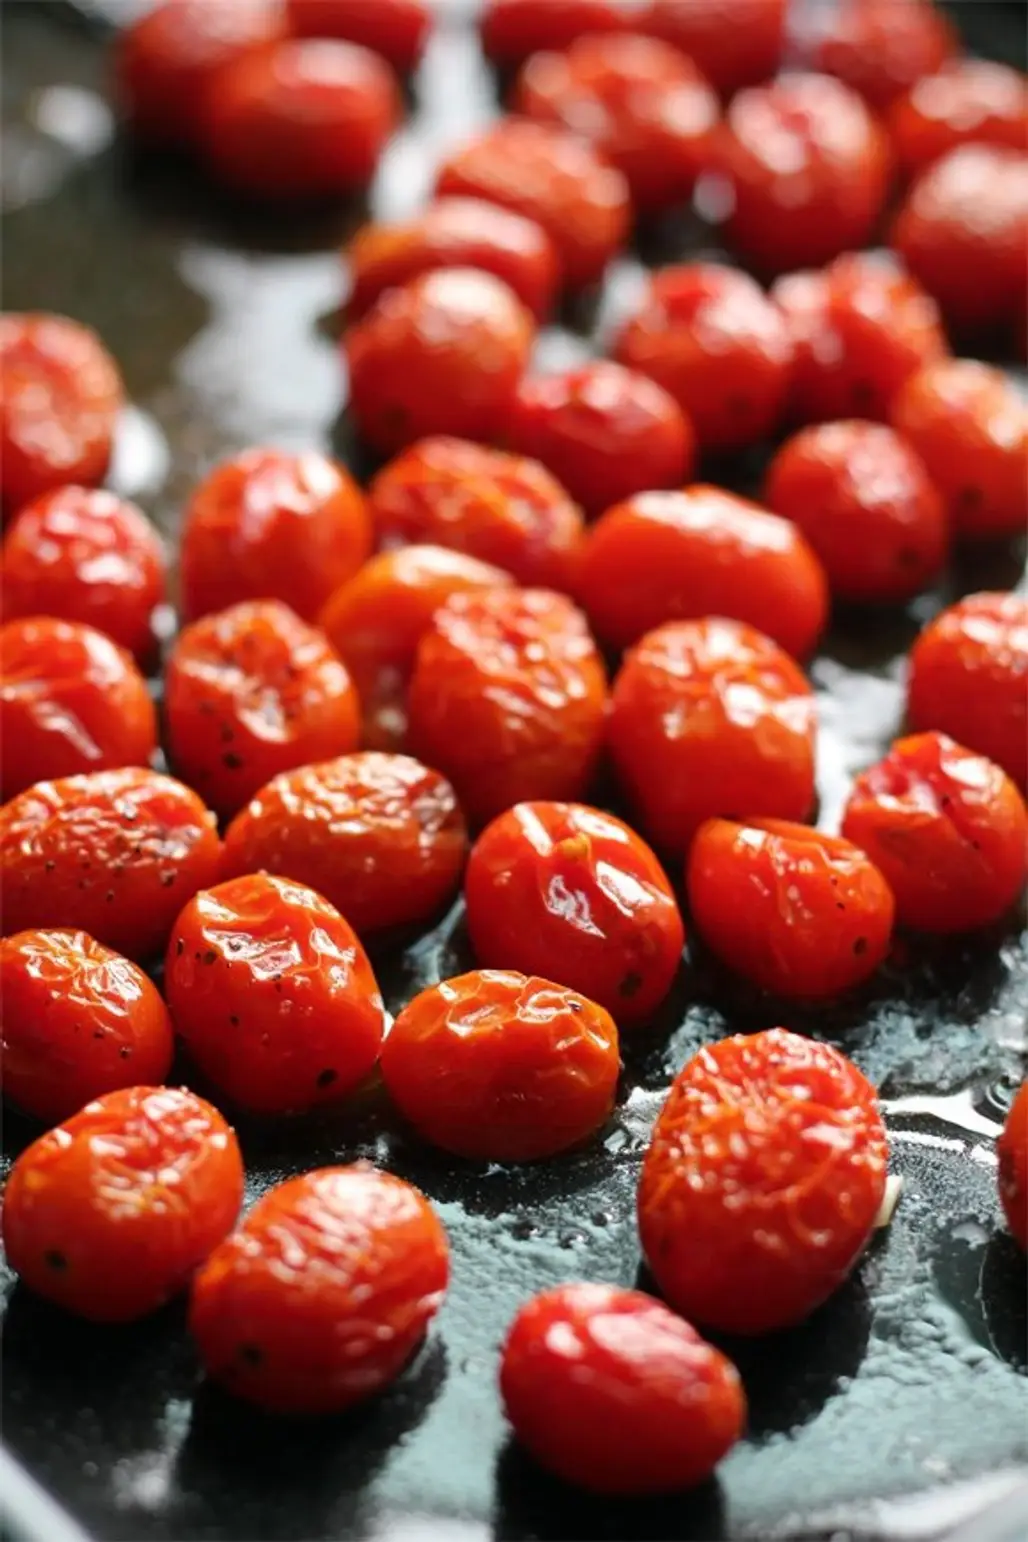 Byrdhouse Blistered Cherry Tomatoes